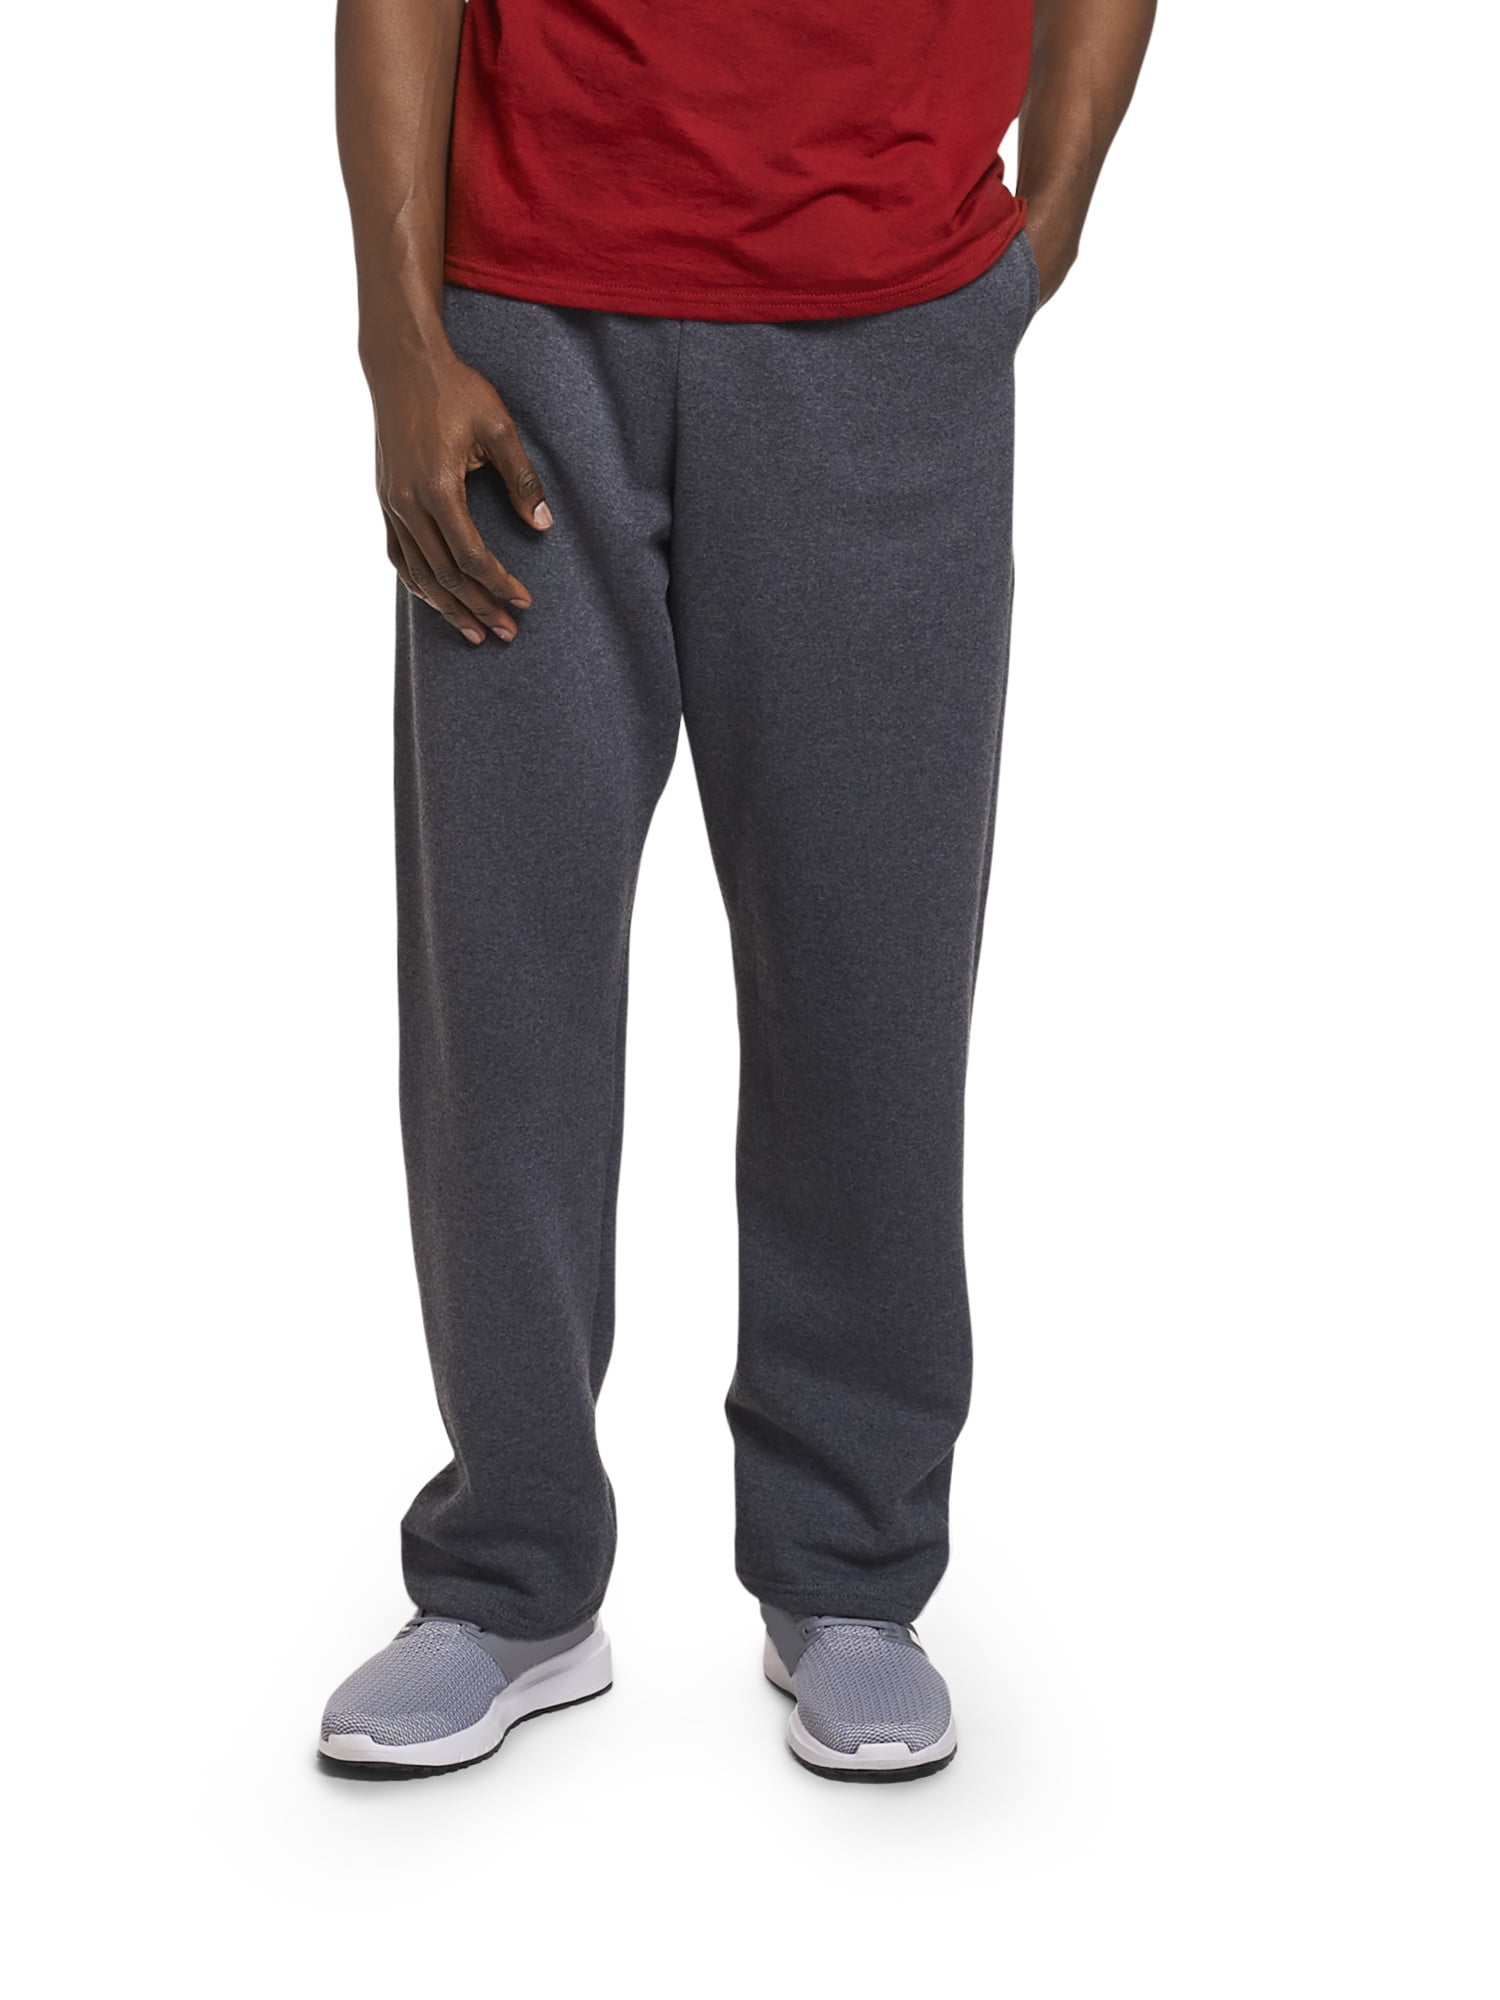 Russell Athletic wind-pants  Russell athletic, Athletic pants